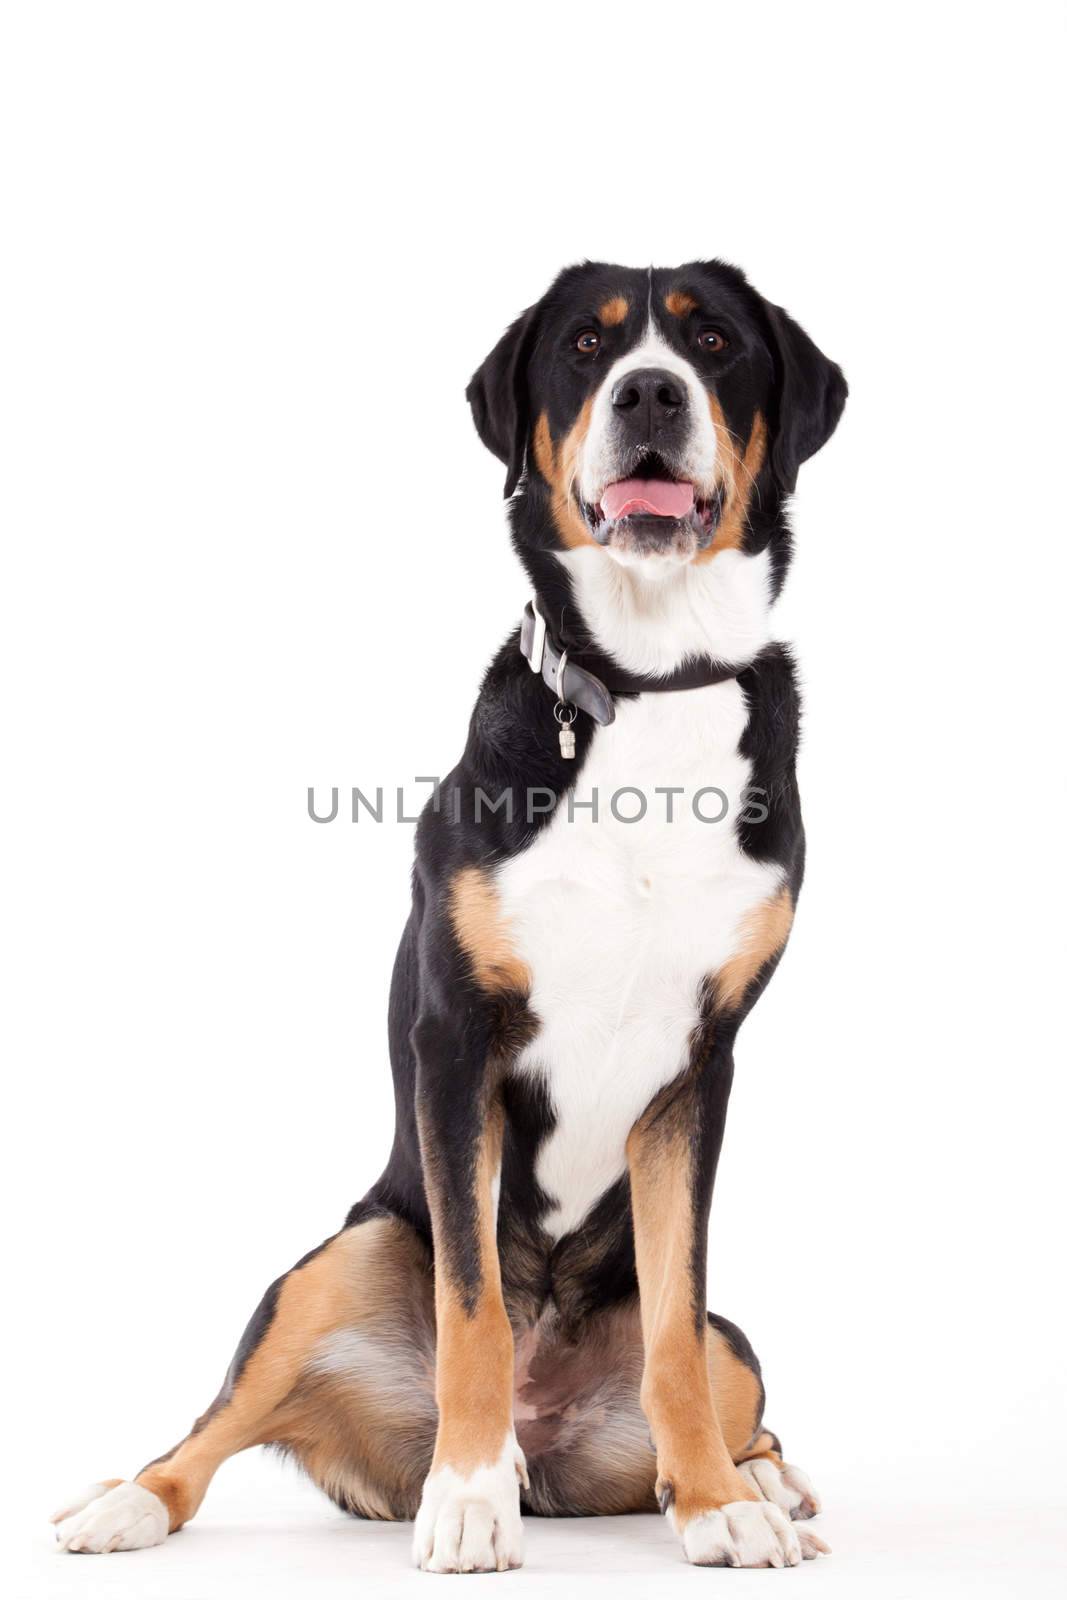 Appenzeller sennenhond sitting and looking by DNFStyle